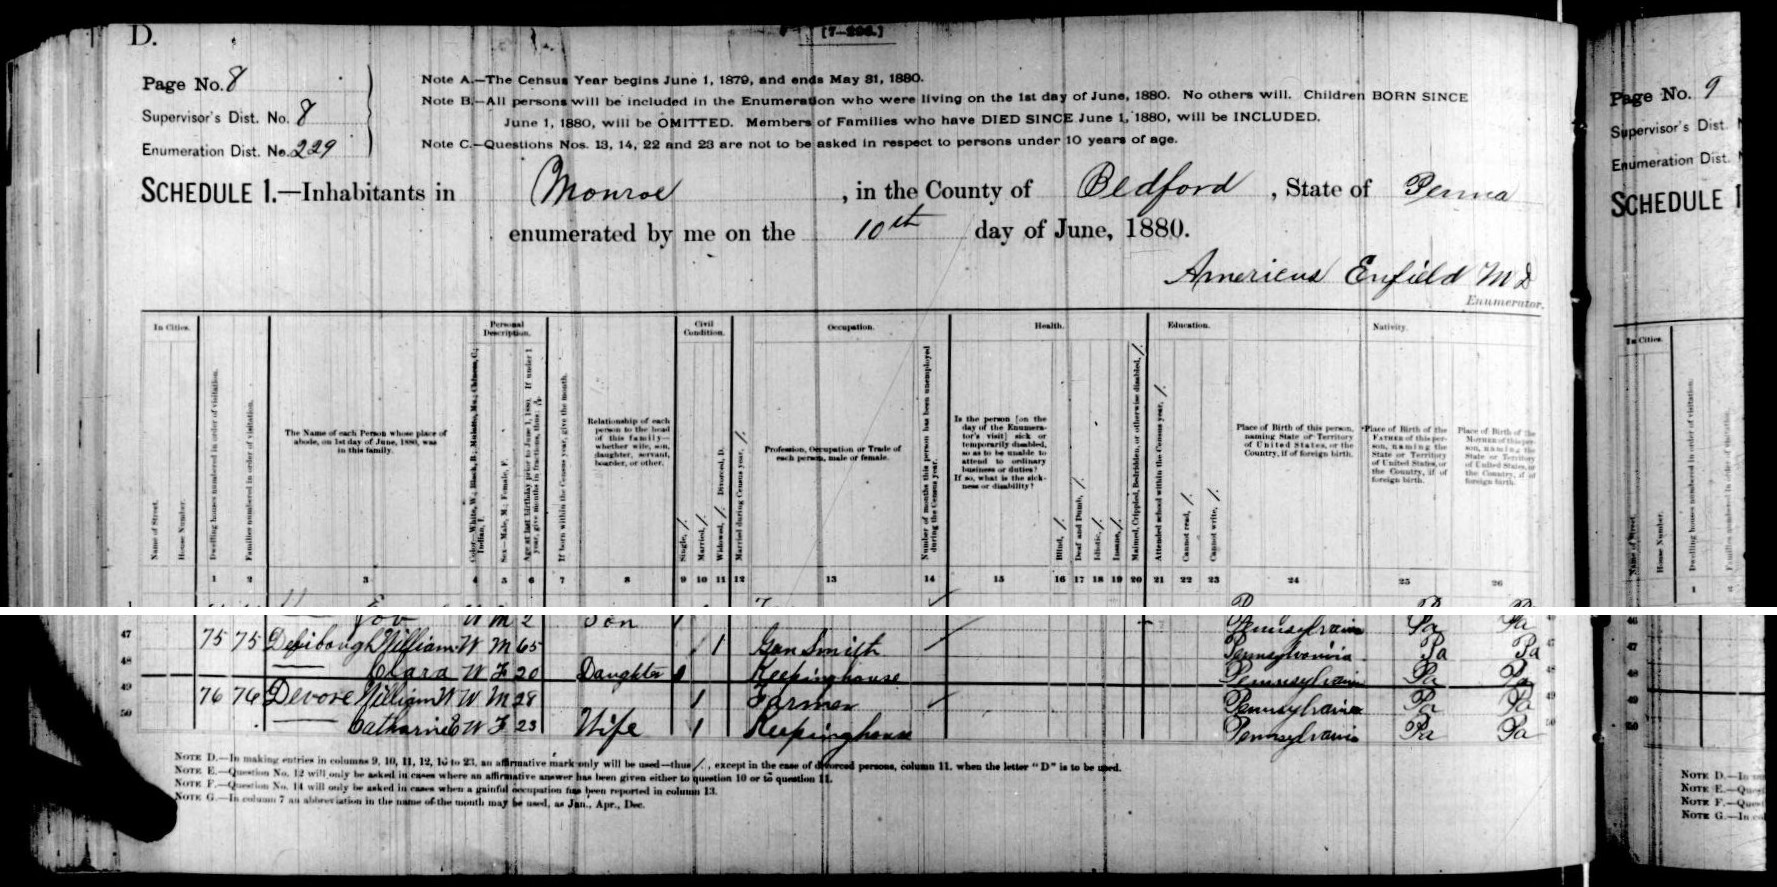 William Defibaugh household in the 1880 census records of Monroe Township, Somerset County, Pennsylvania.